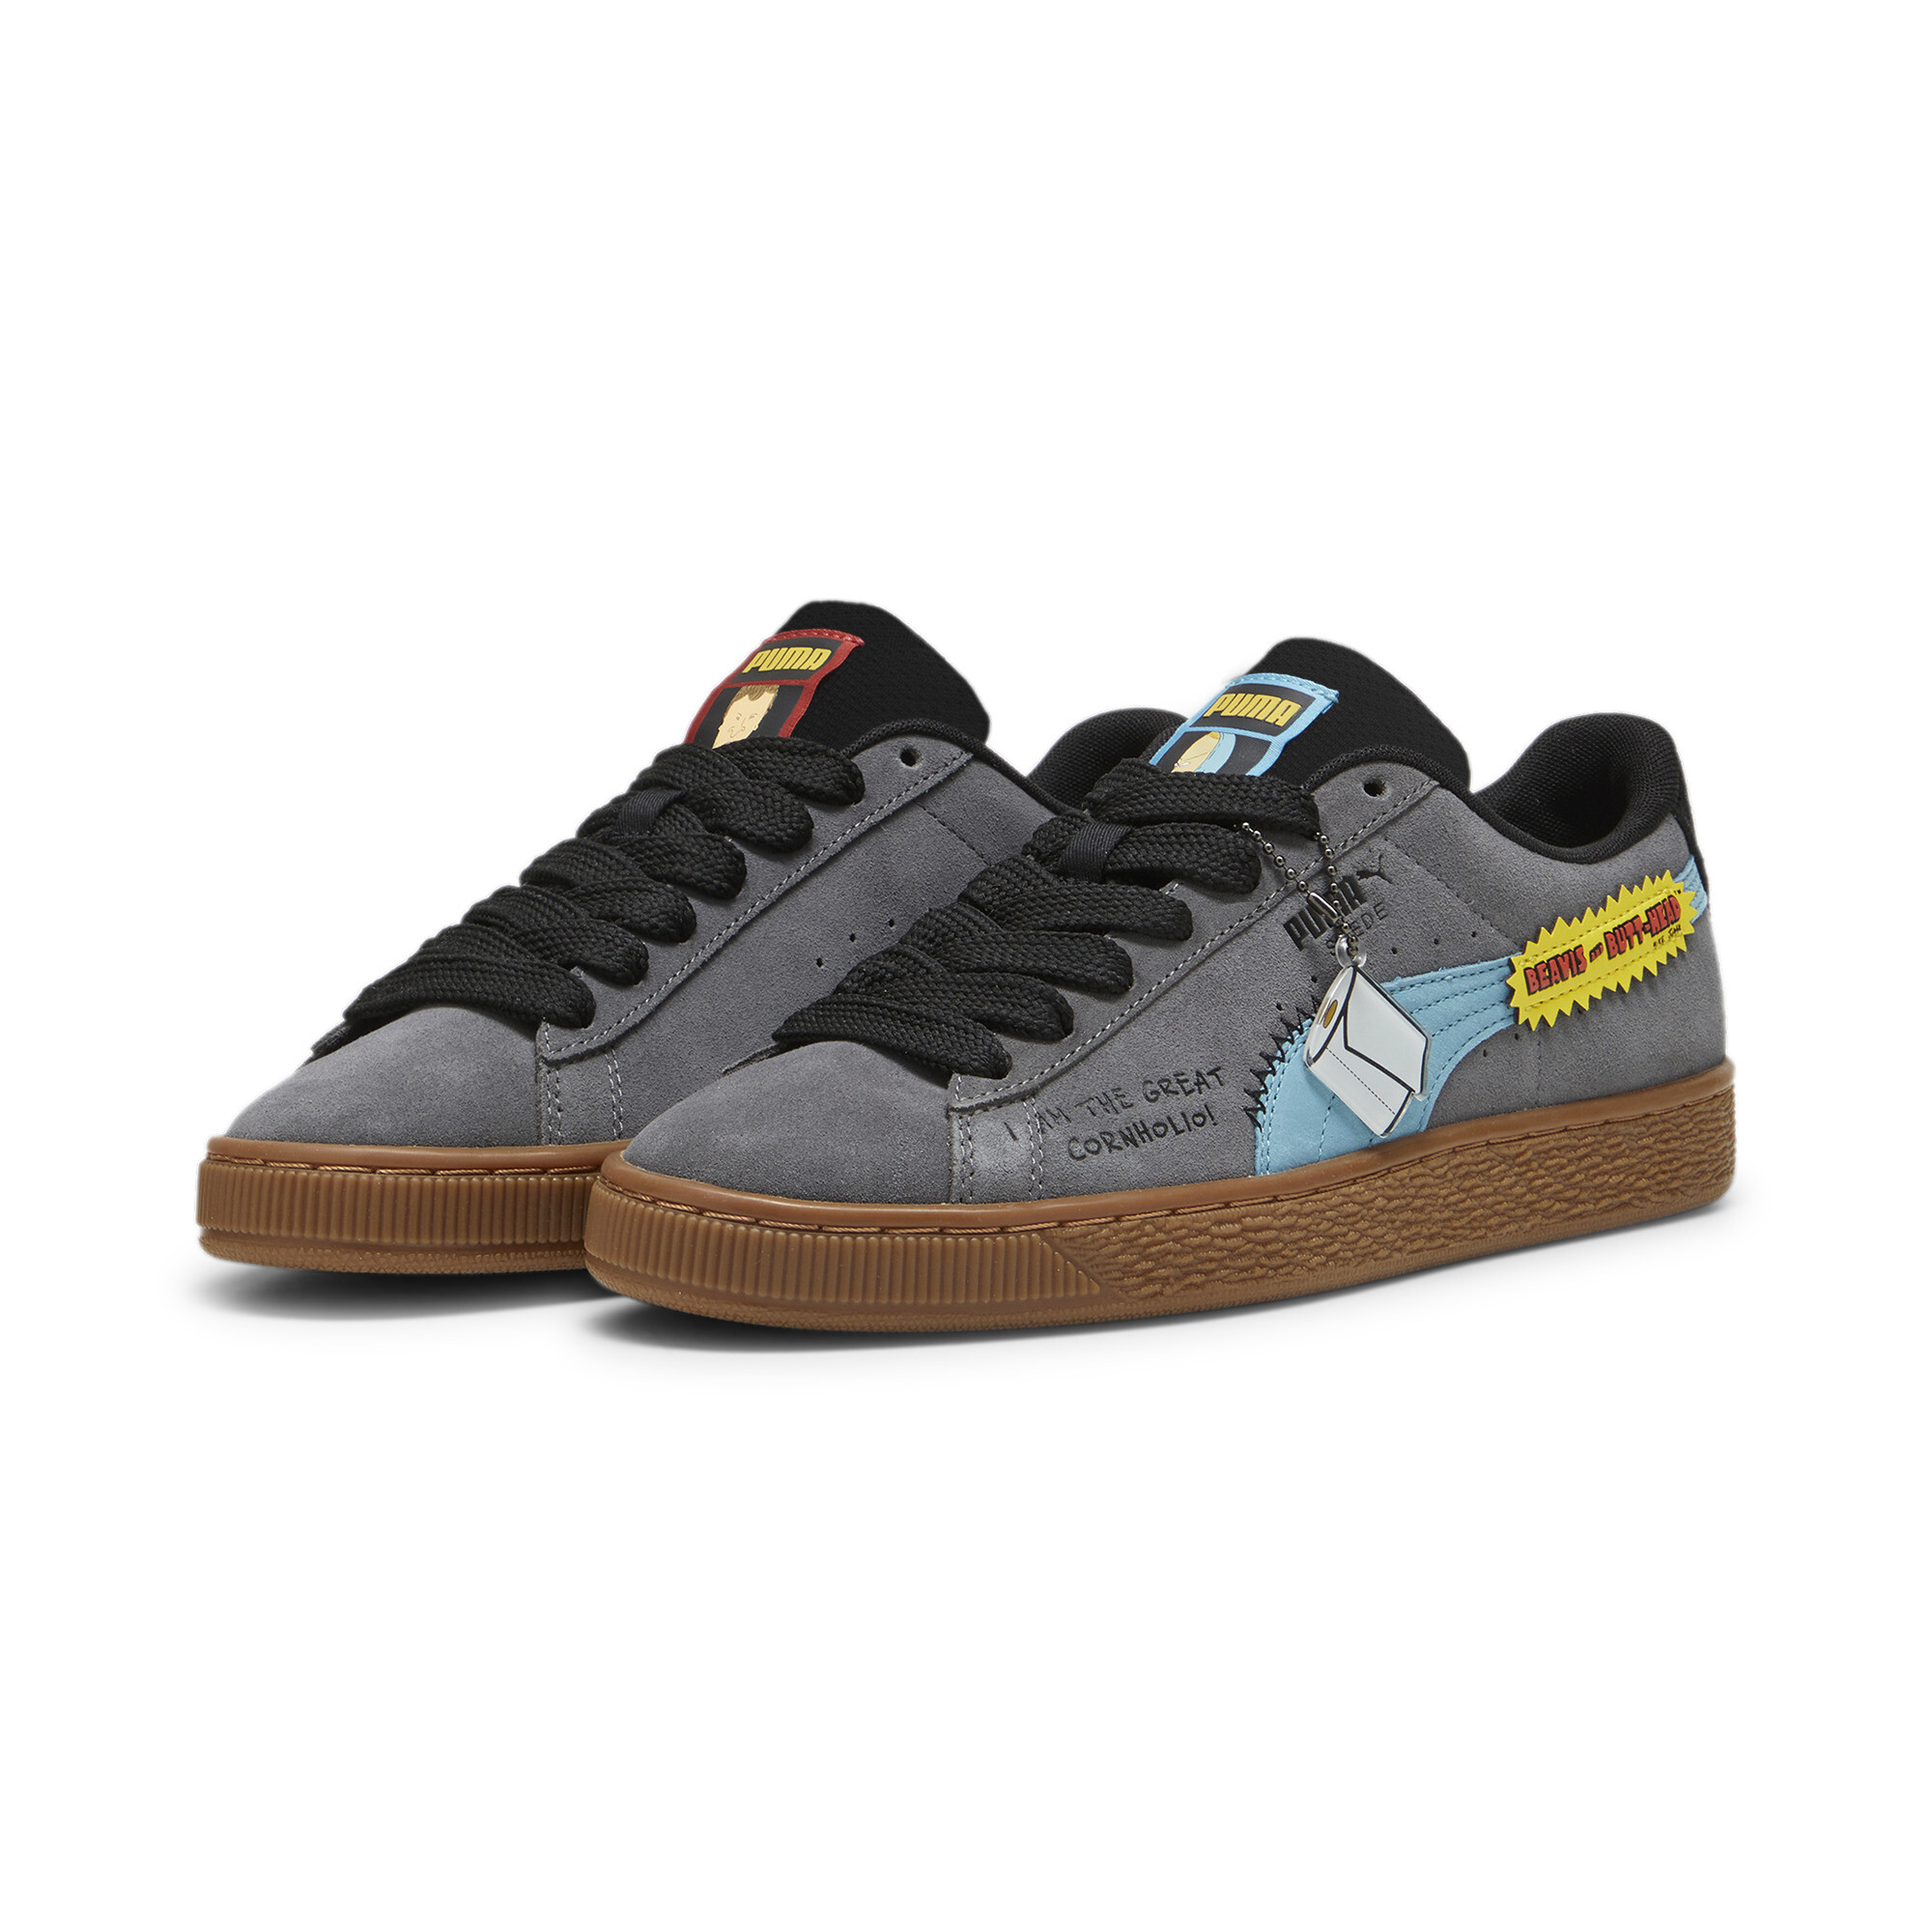 Kids' PUMA X BEAVIS AND BUTTHEAD Suede Sneakers In Gray, Size EU 38